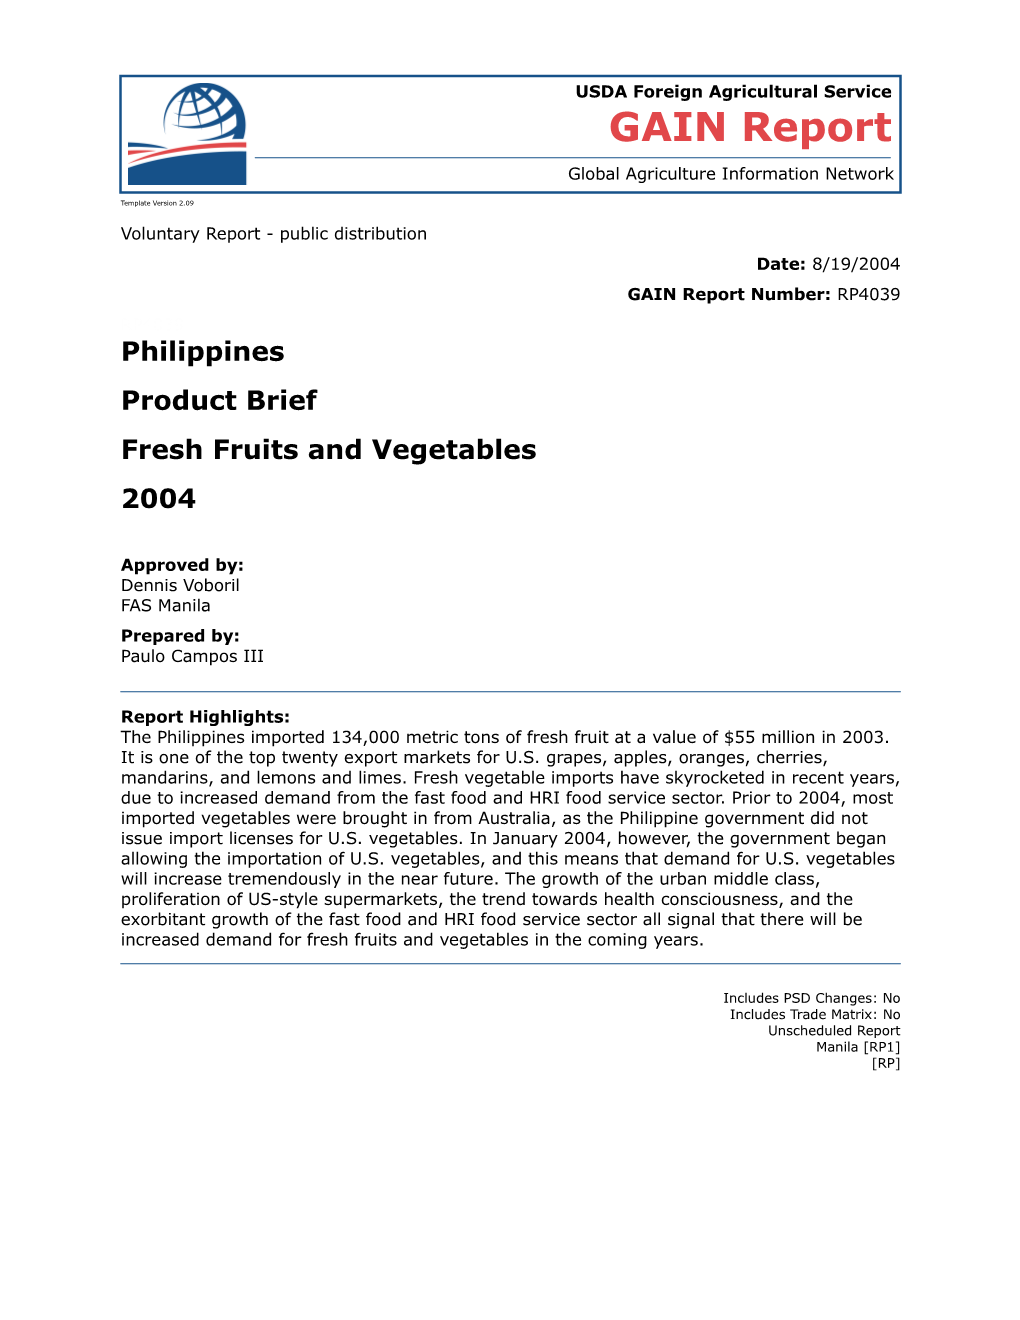 GAIN Report - Fresh Fruits and Vegetables